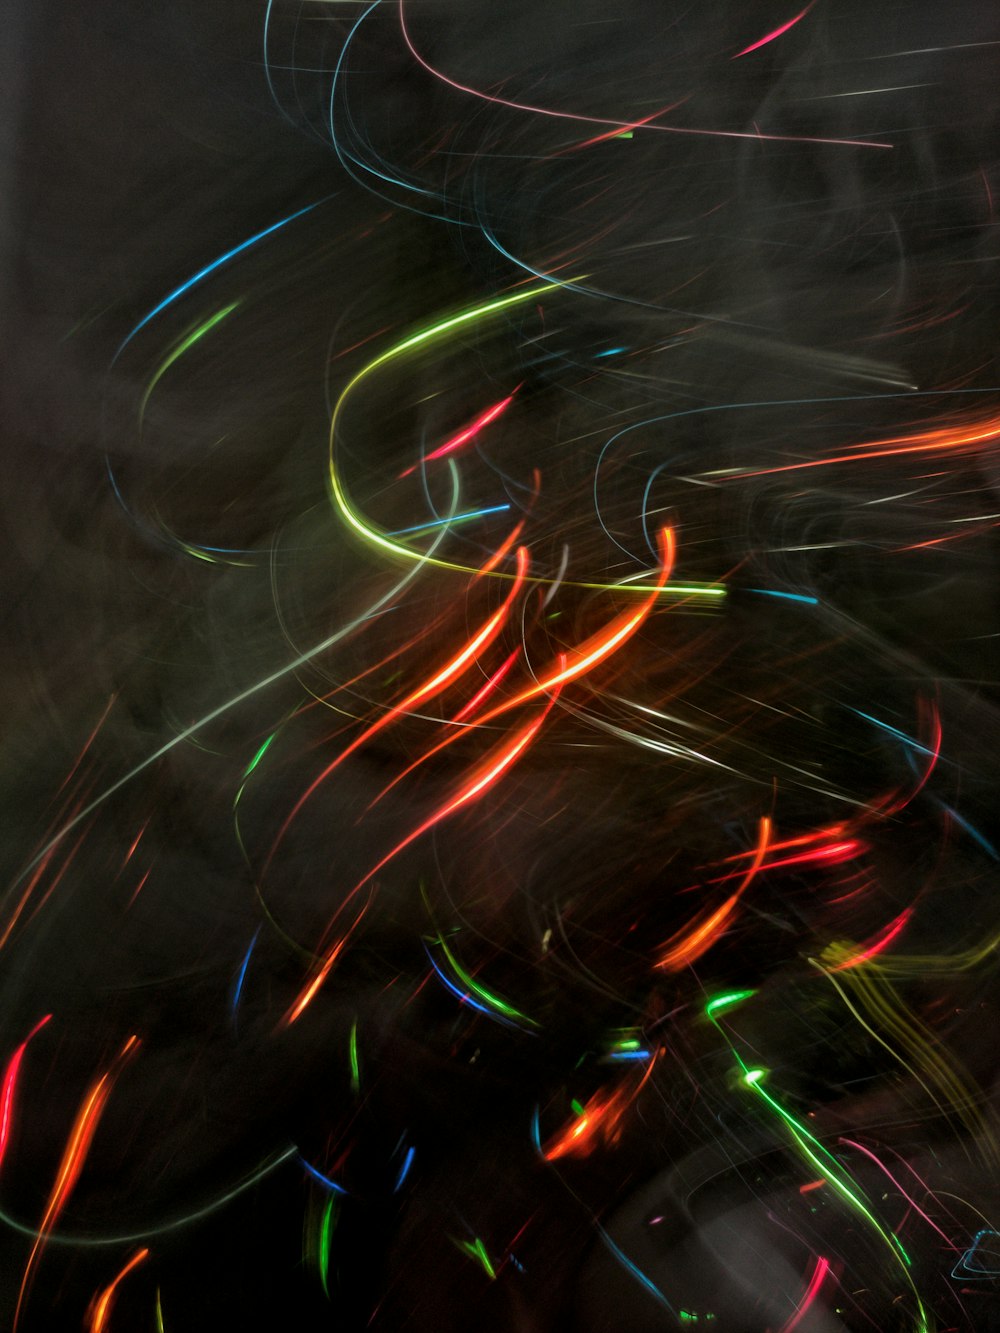 a blurry photo of a bunch of lights